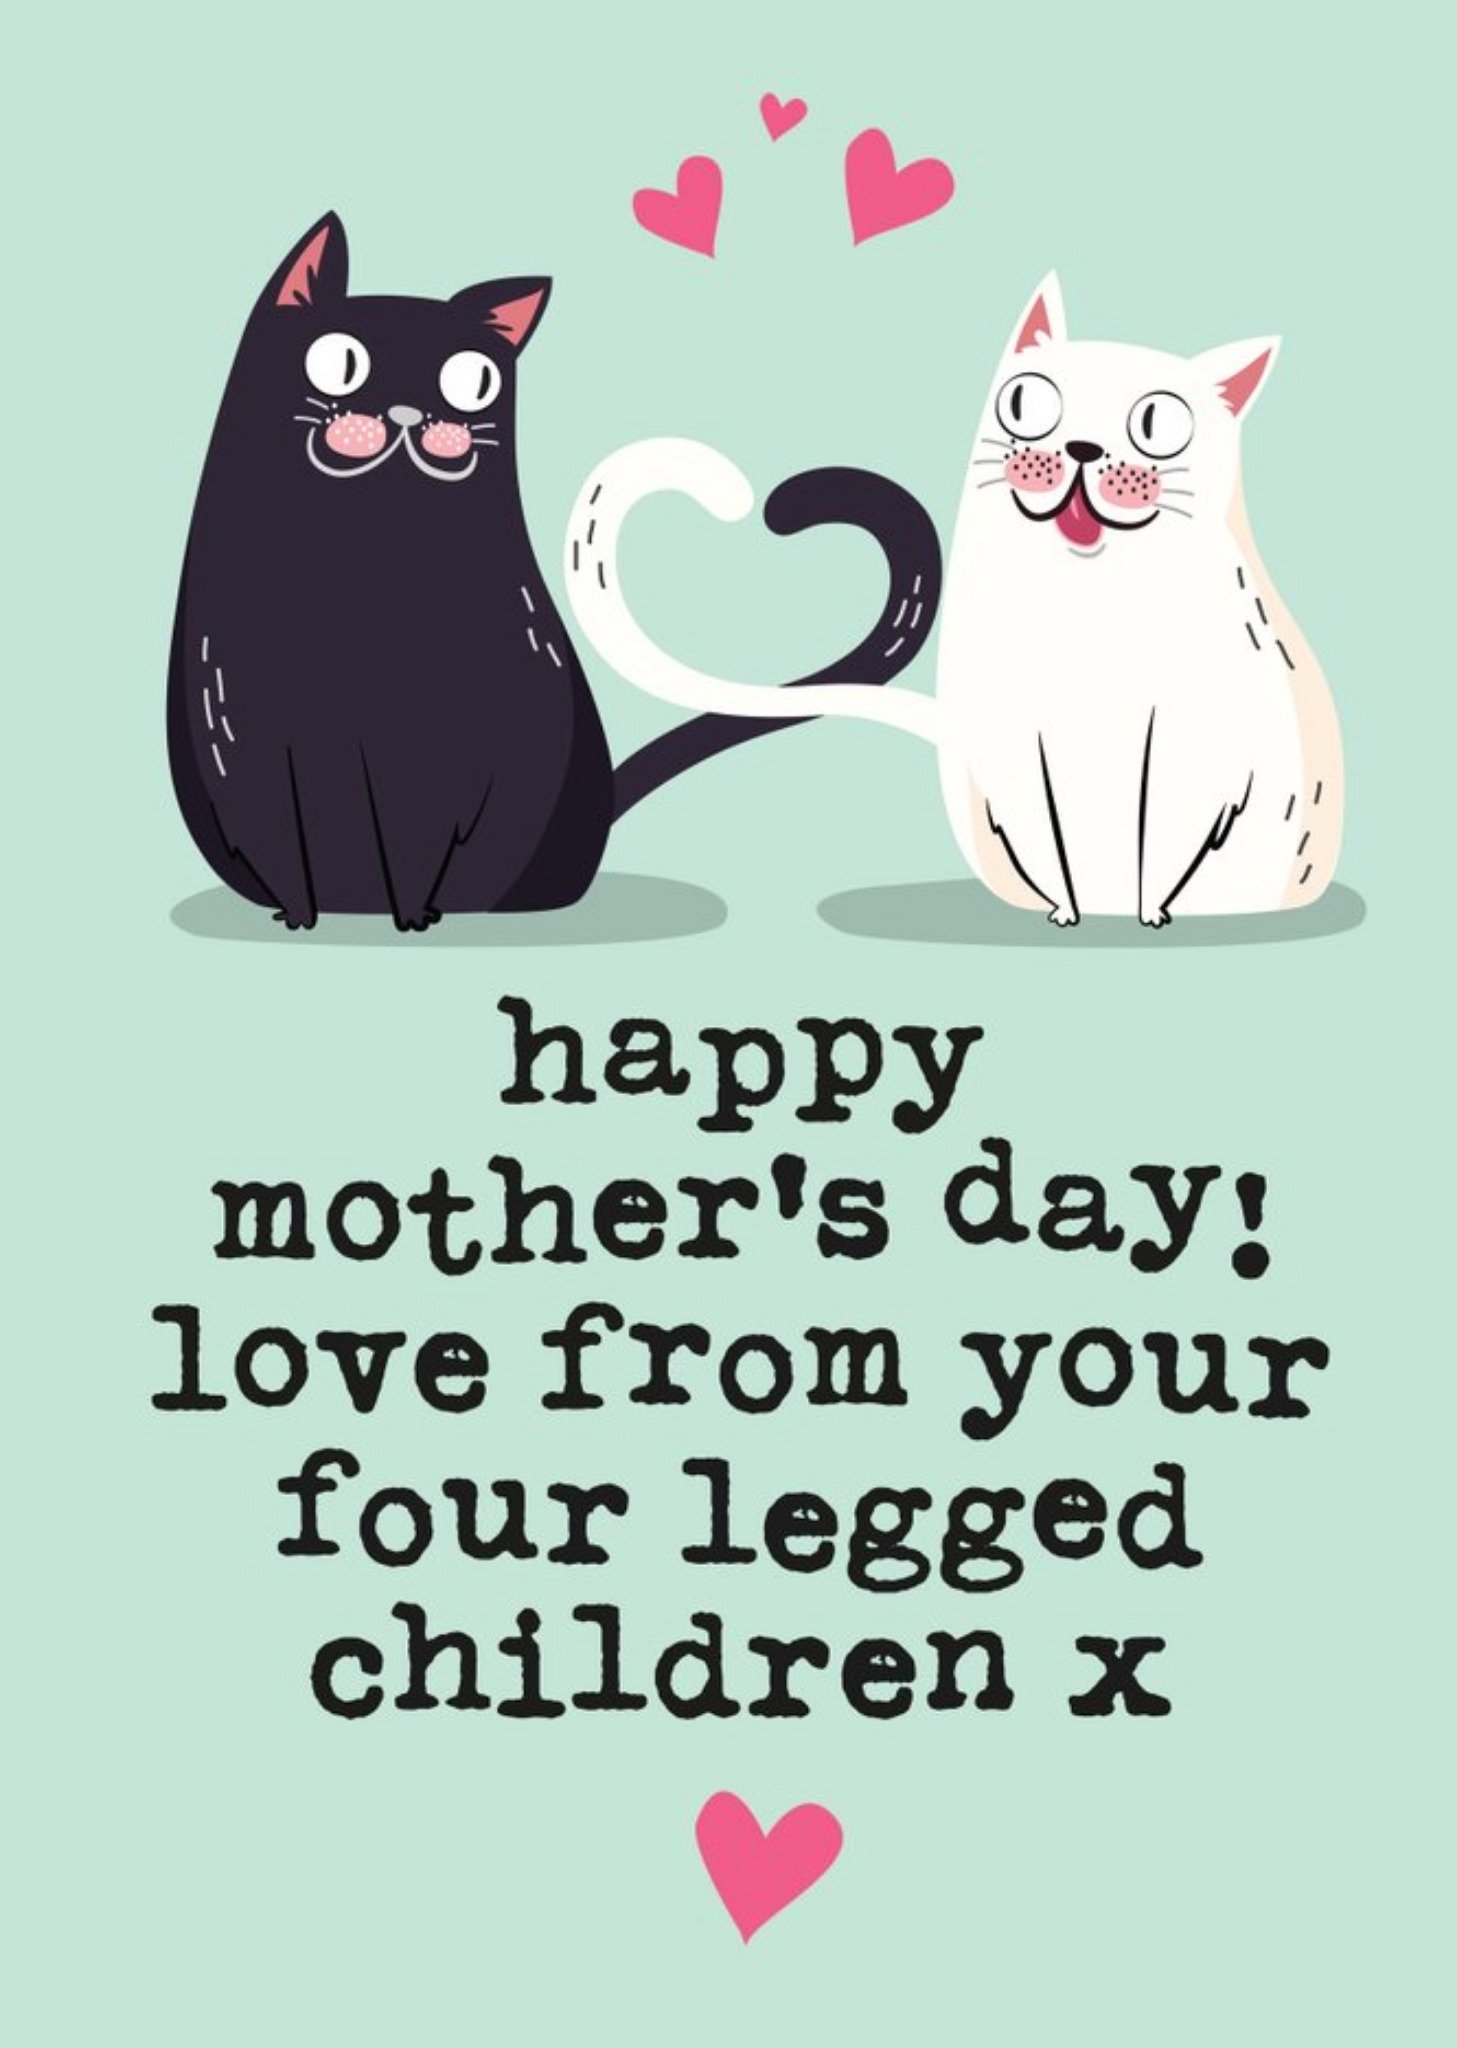 Moonpig Mrs Best Illustration Cats Mother's Day Card Ecard